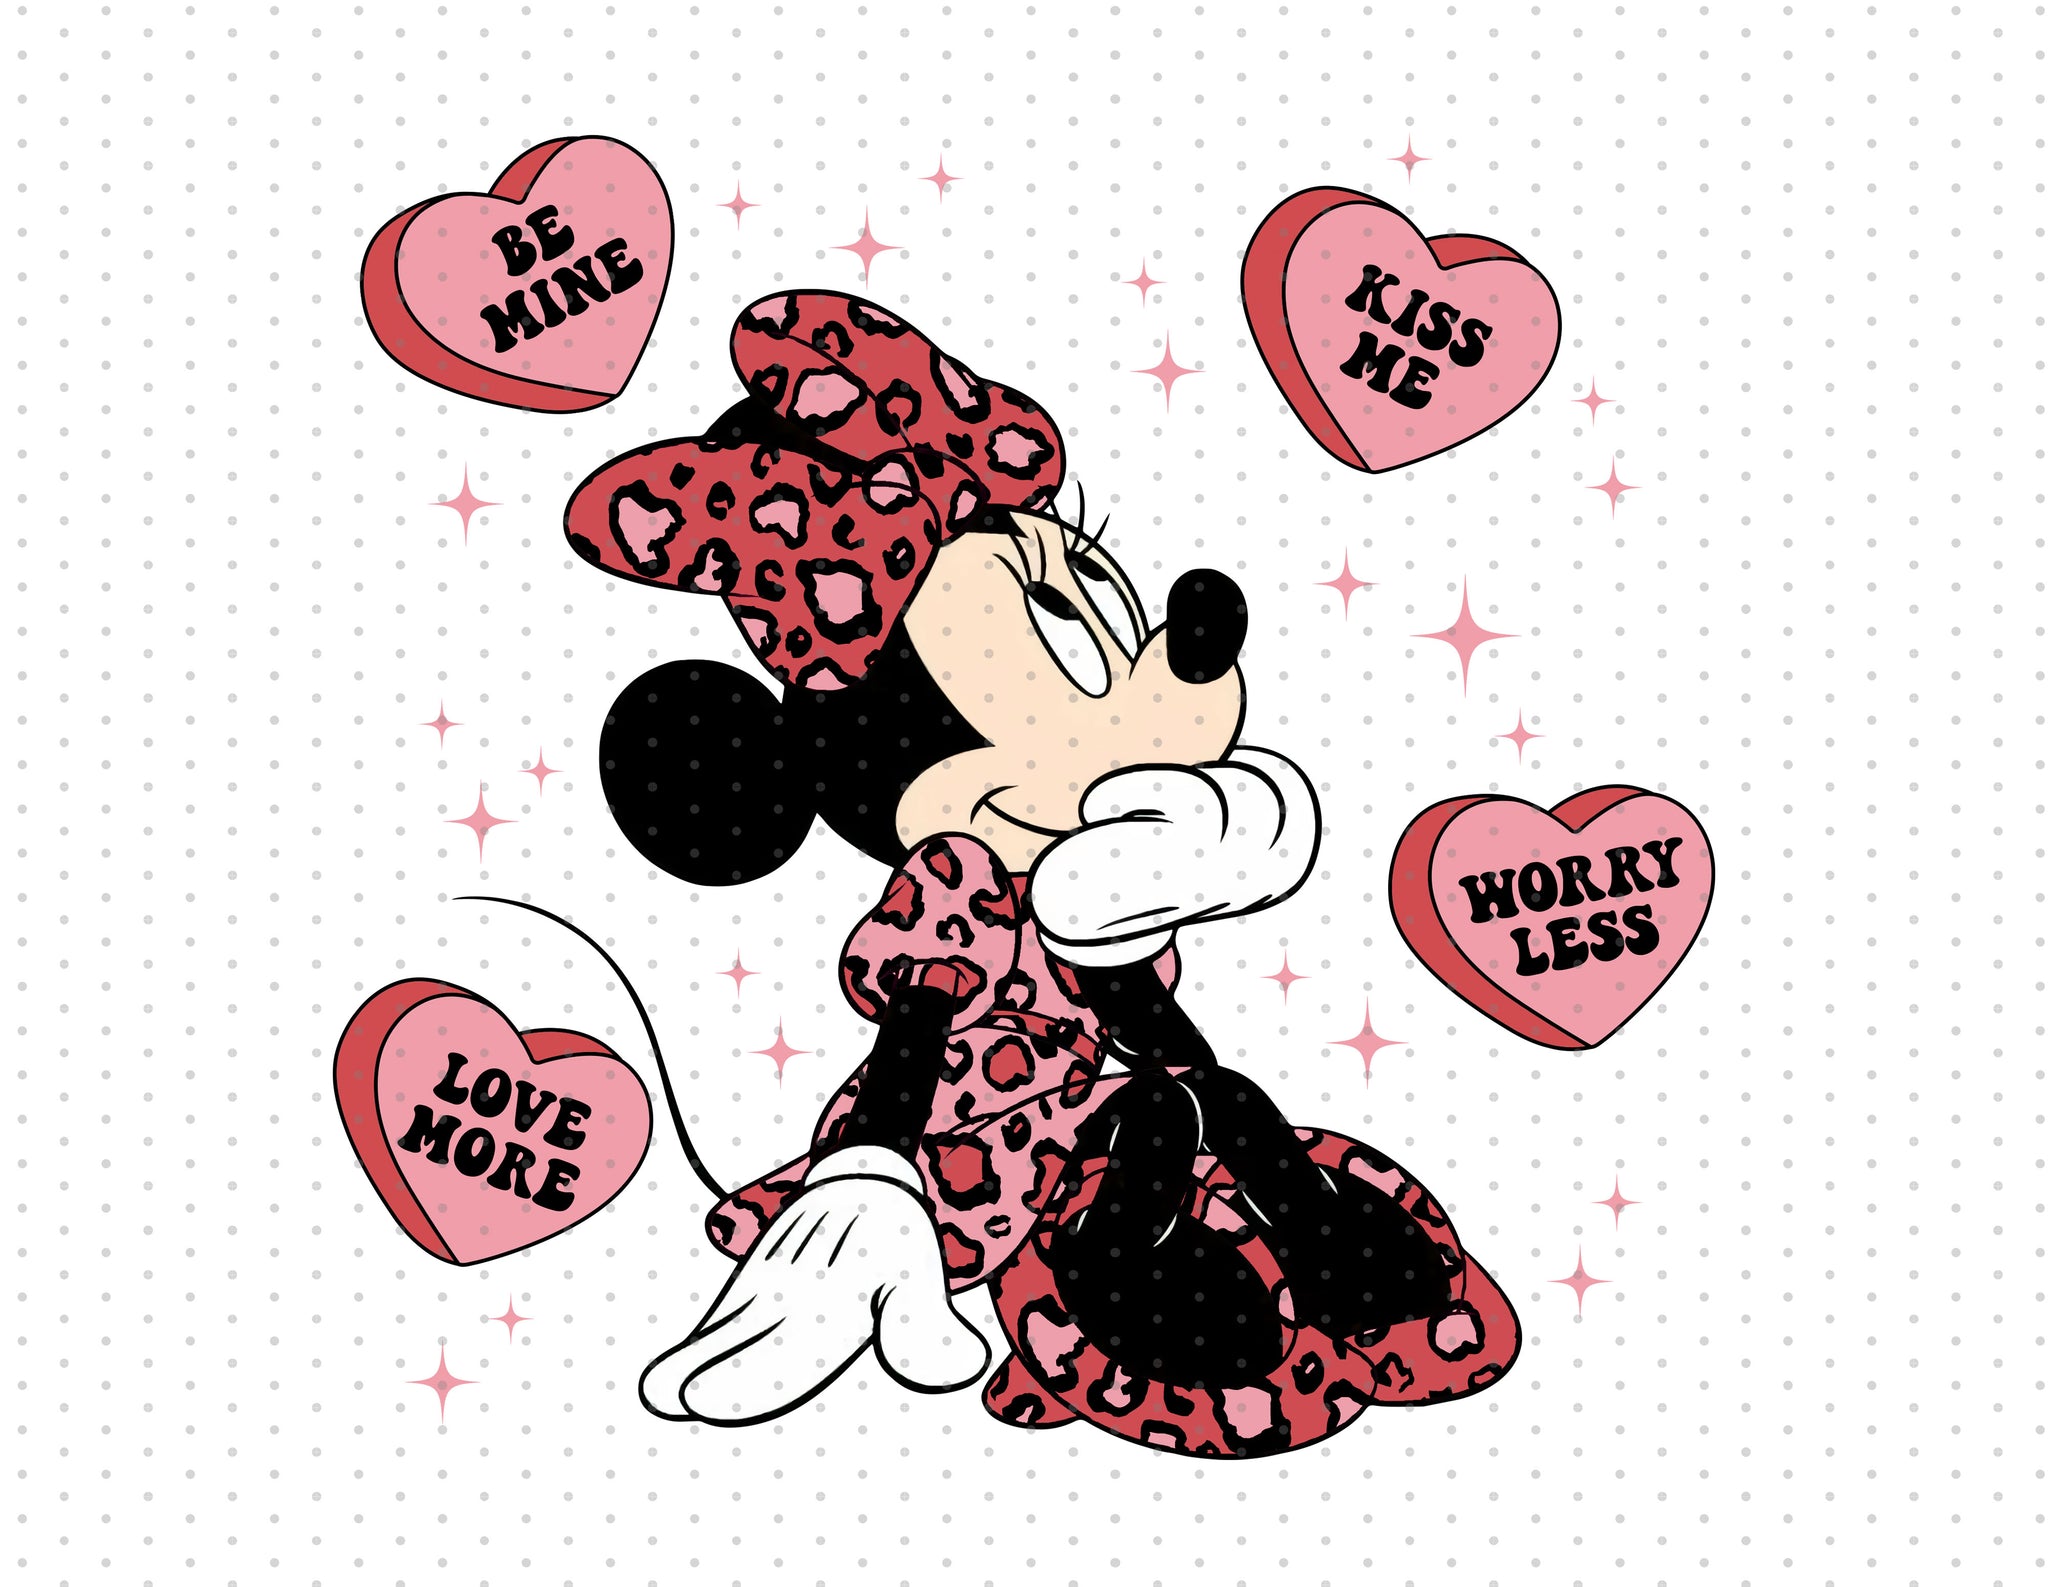 Mouse And Friends Disney Valentine's Day Sublimation PNG